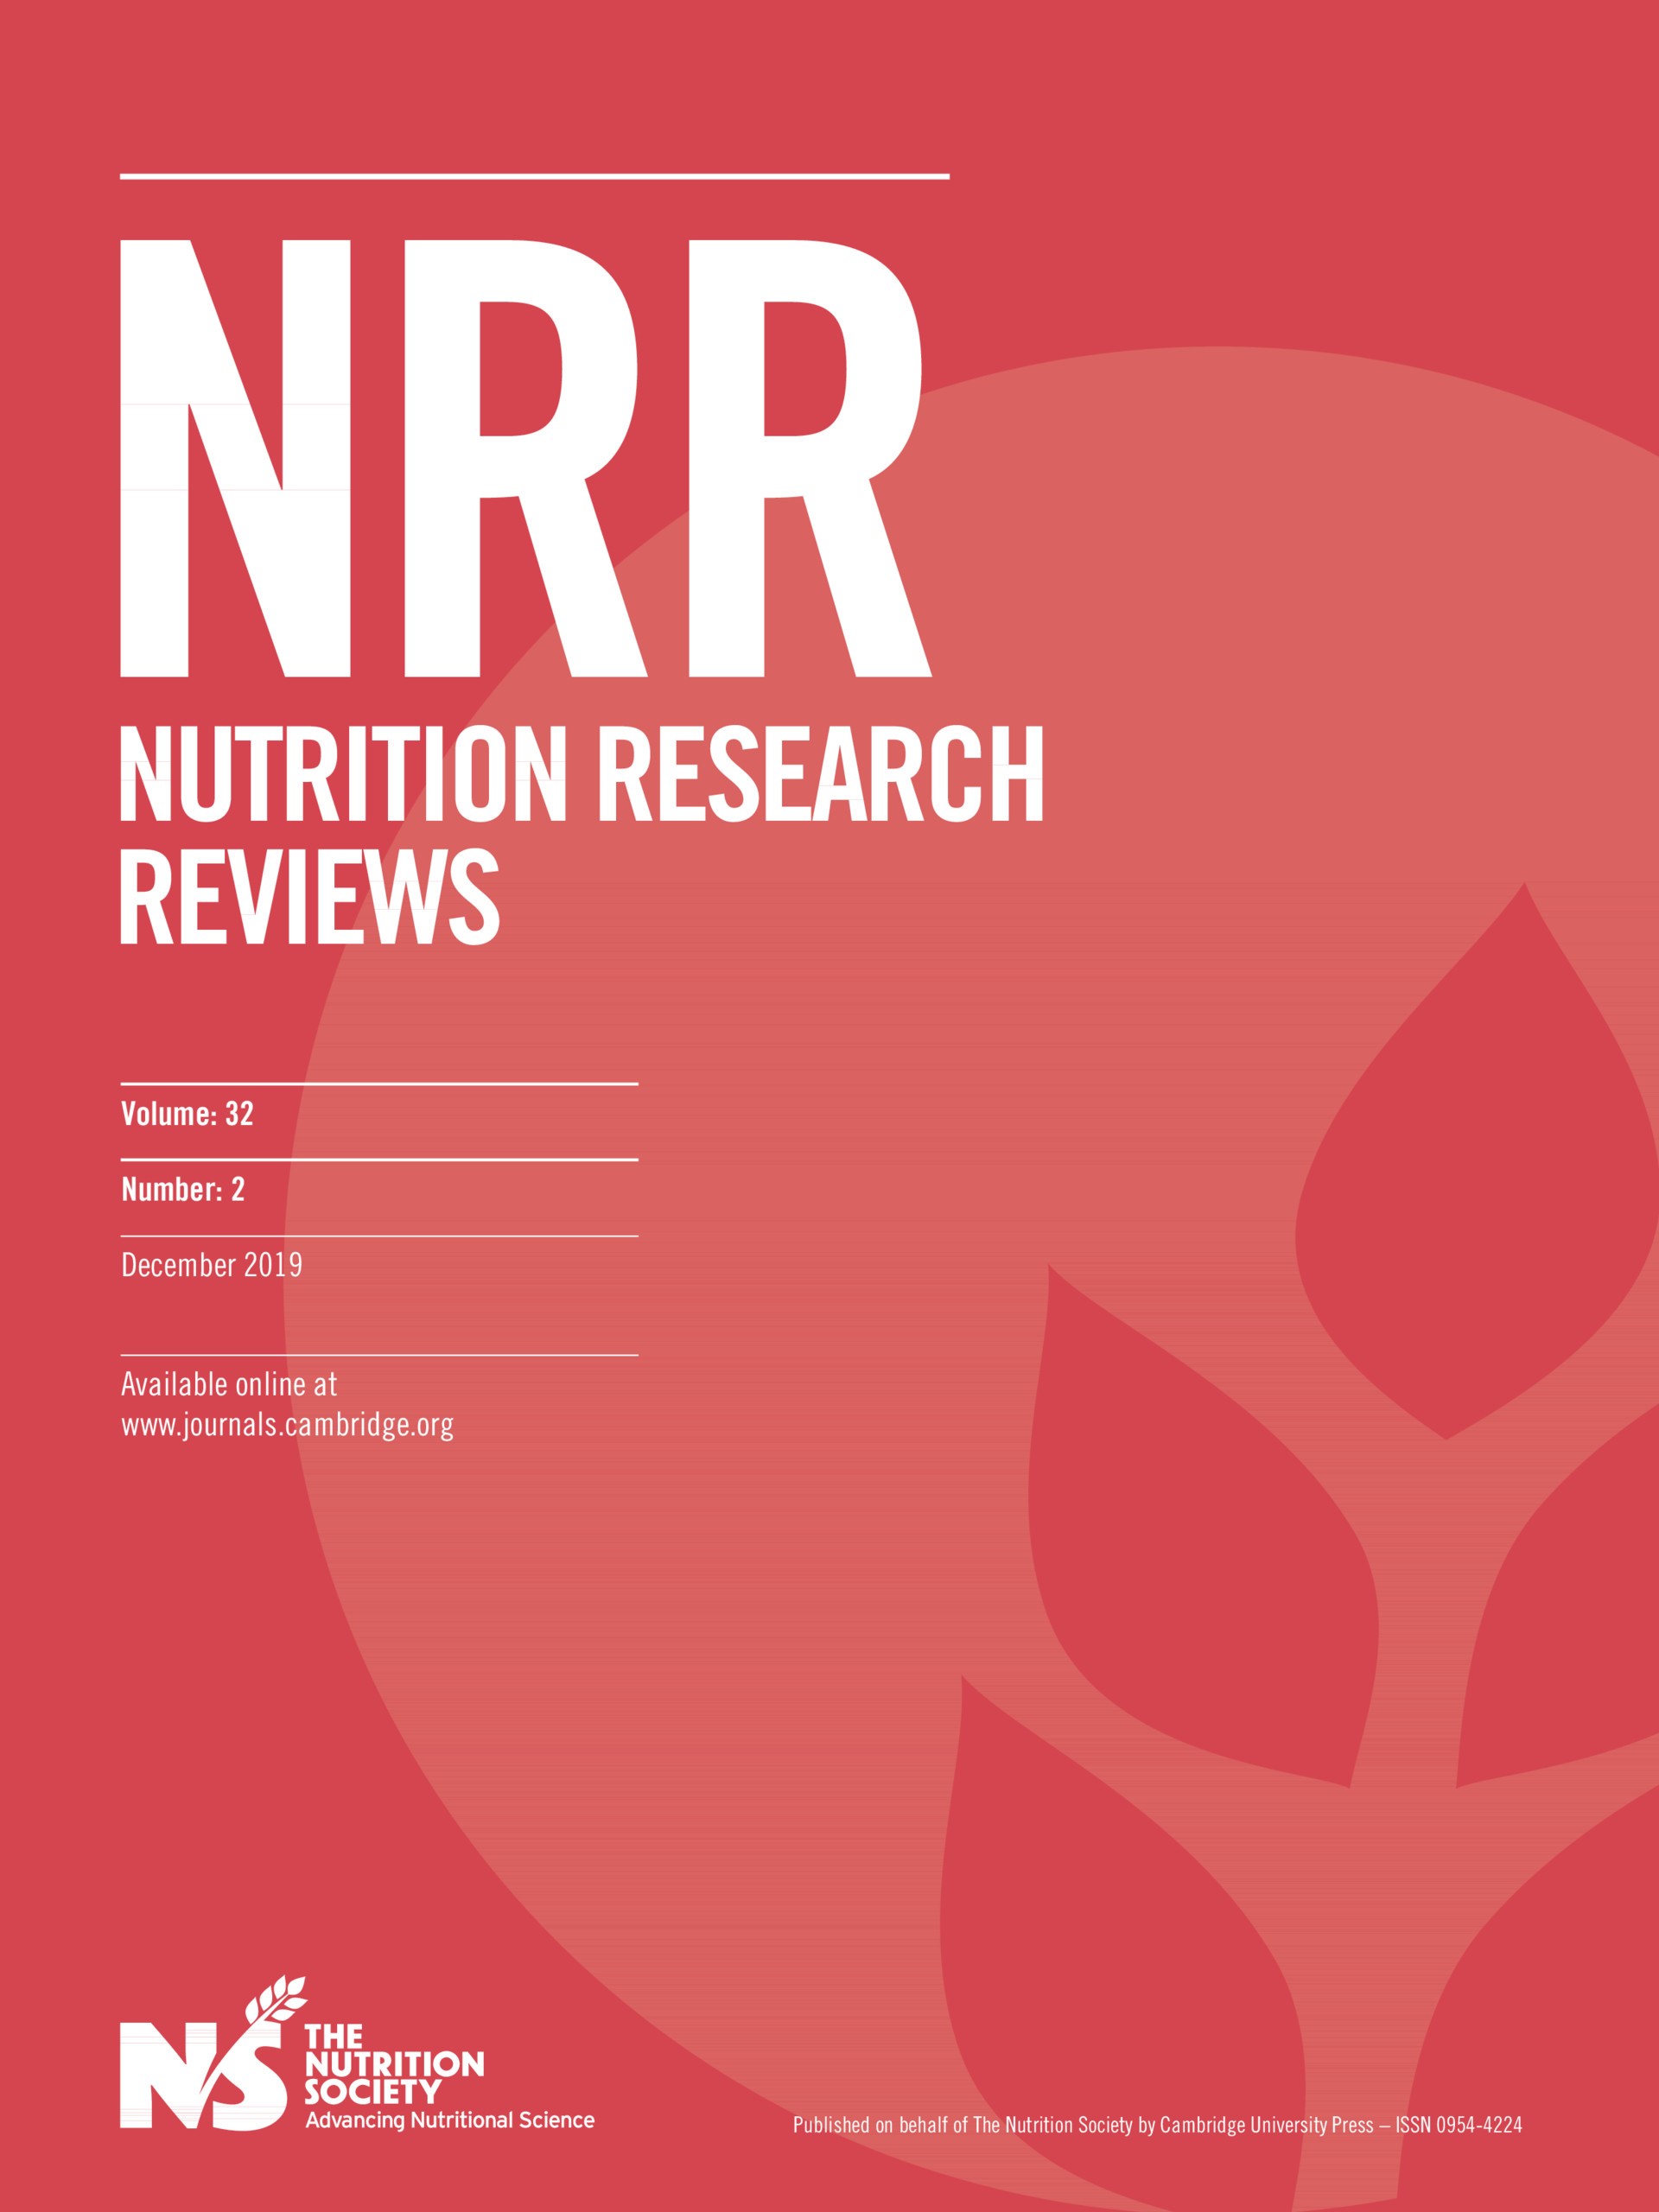 nutrition research articles 2022